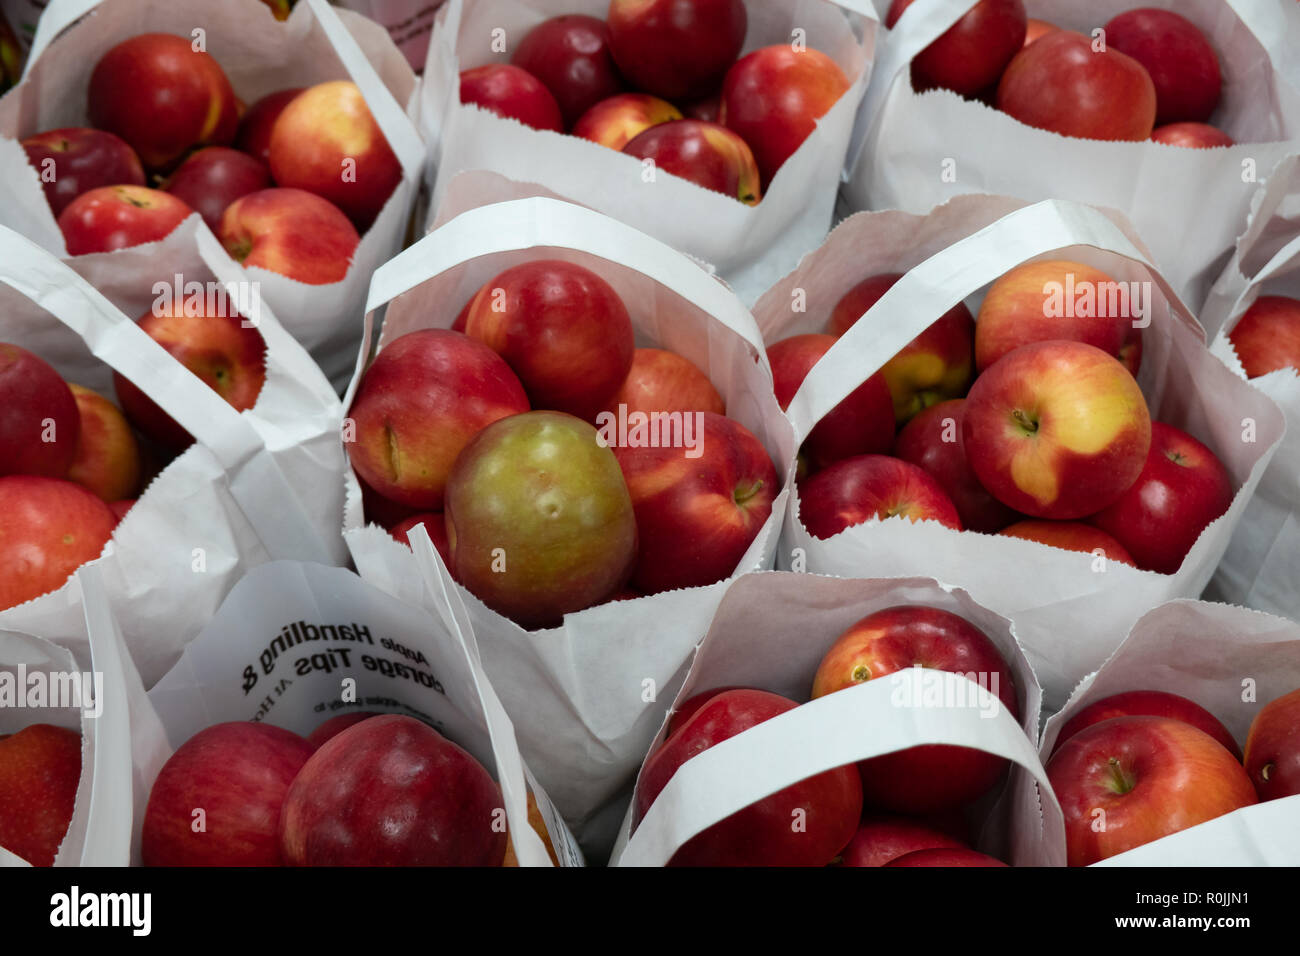 https://c8.alamy.com/comp/R0JJN1/a-display-of-bags-of-fresh-raw-apples-in-a-small-grocery-store-in-speculator-ny-usa-R0JJN1.jpg